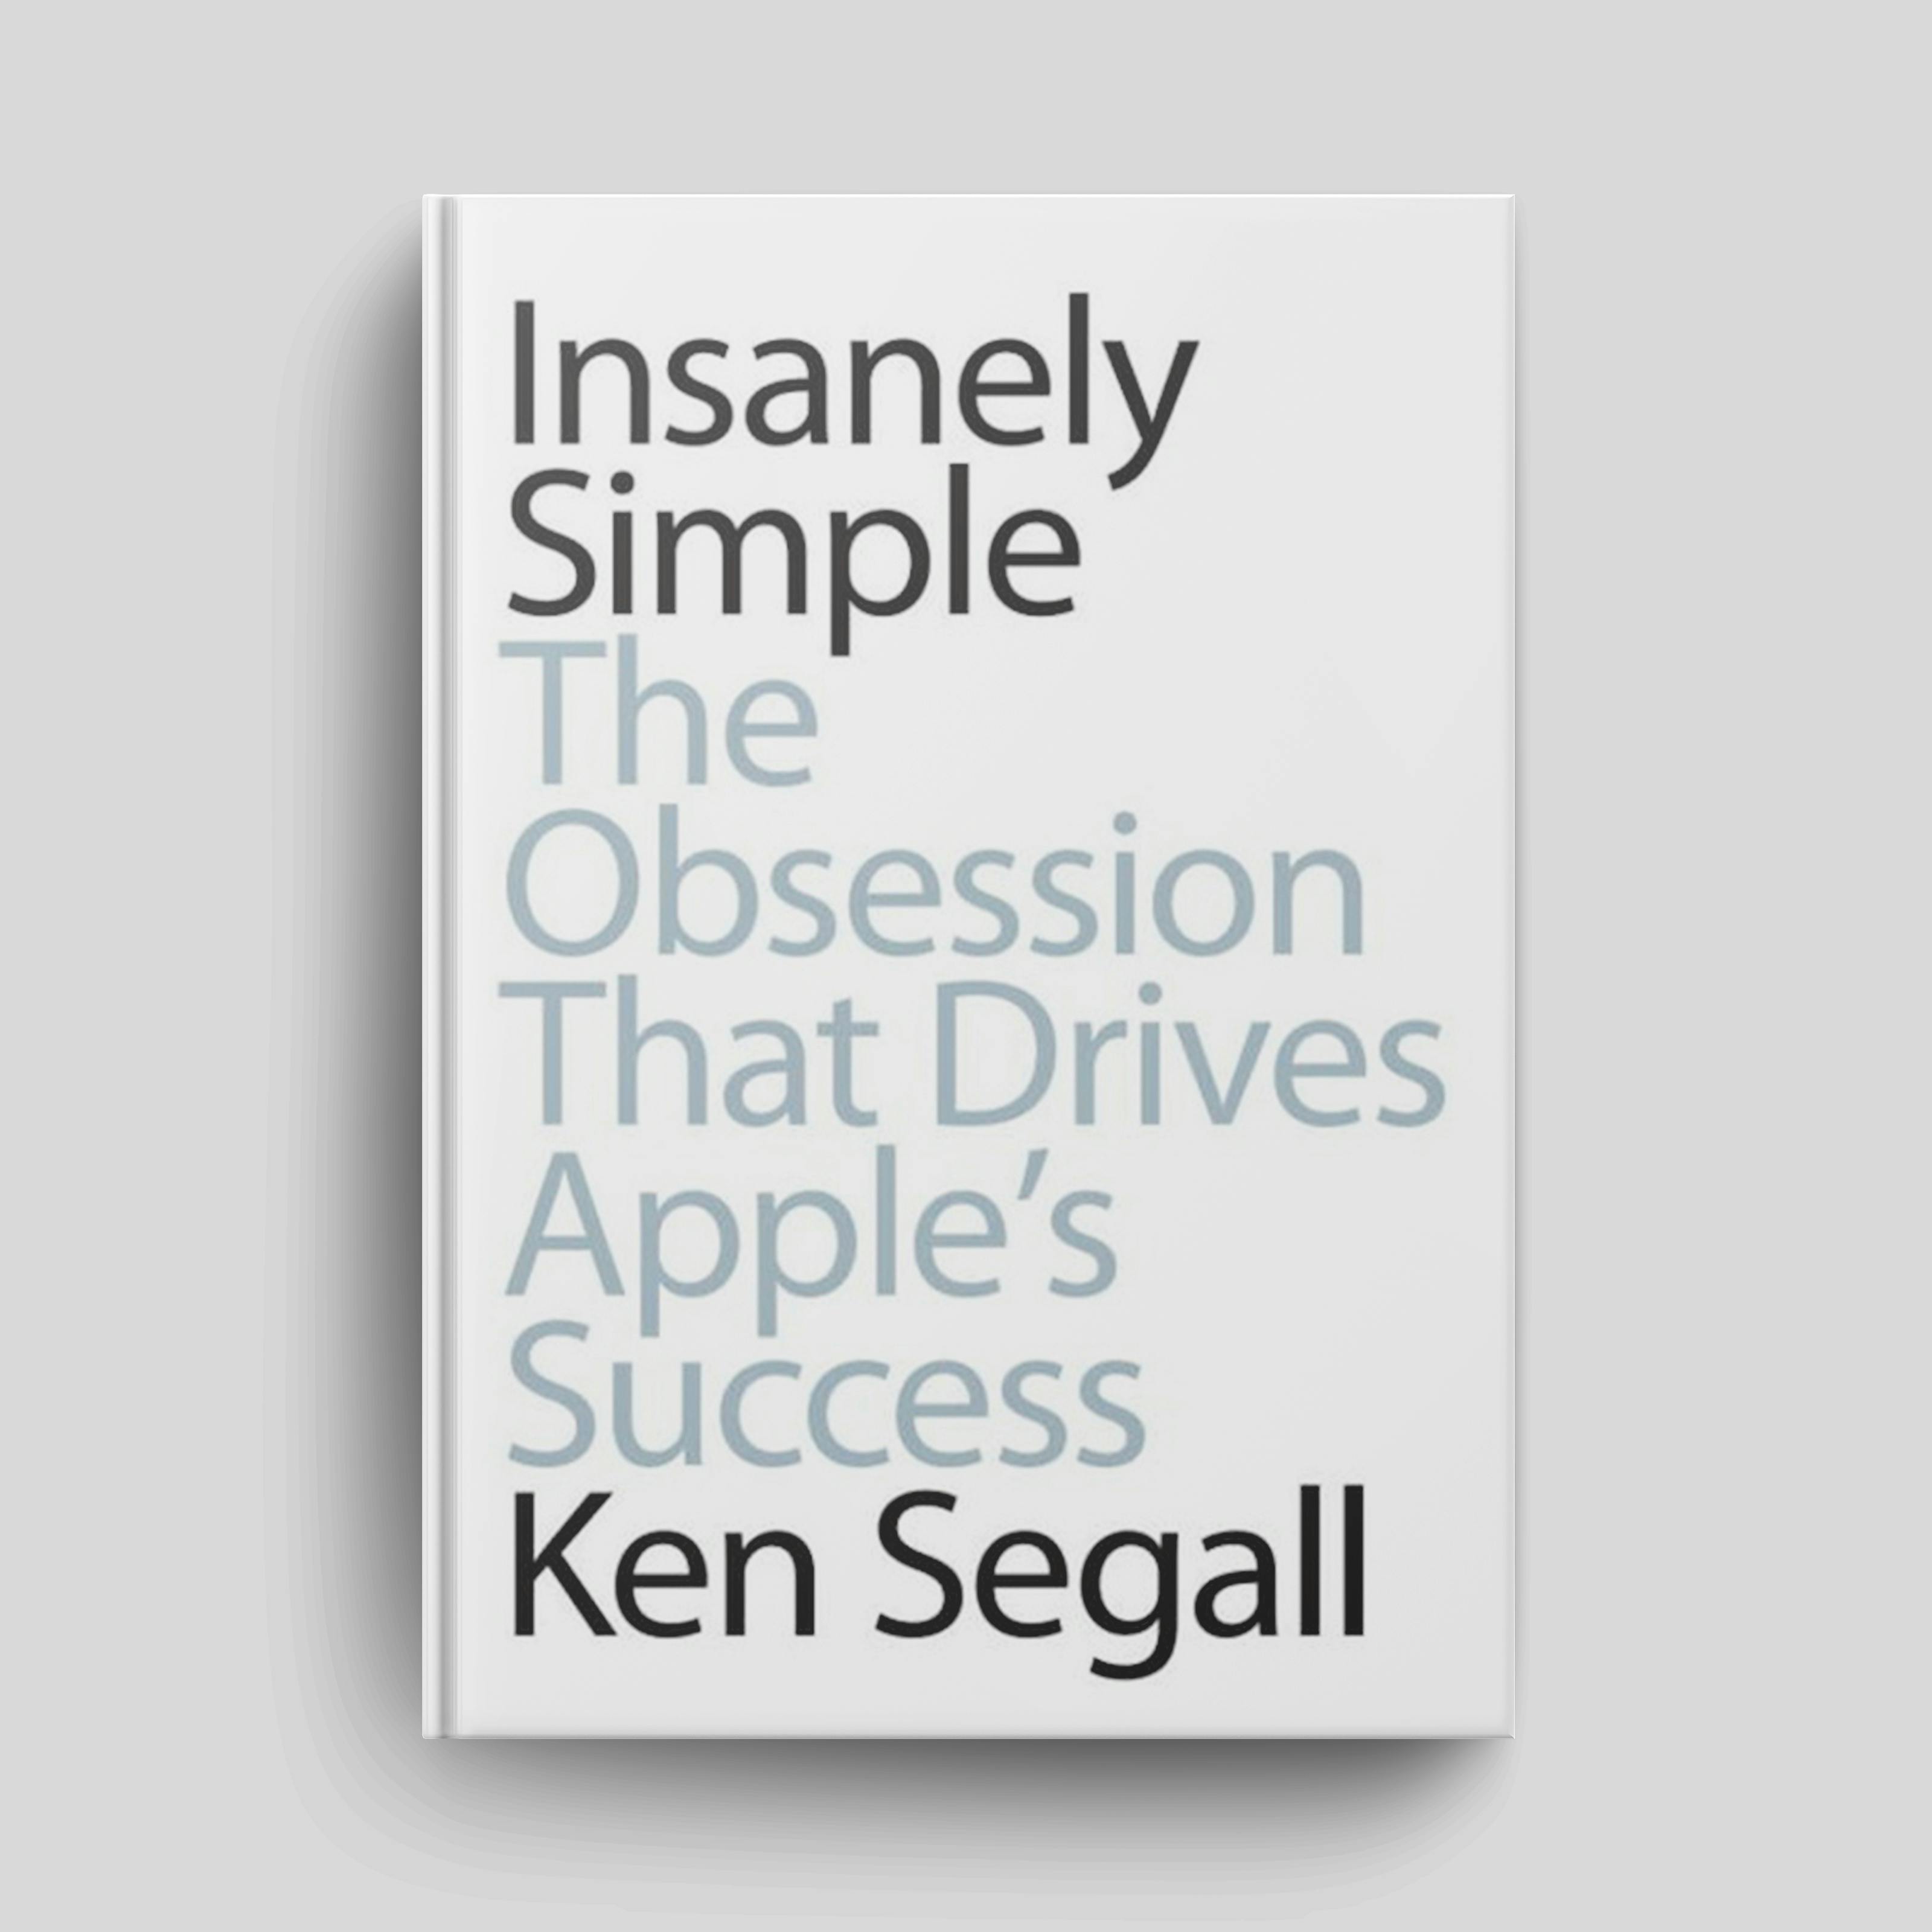 Trailer - Book: (Part 1) ”Insanely Simple: The Obsession That Drives Apple’s Success” | Episode #174 (Part 1 of 2)